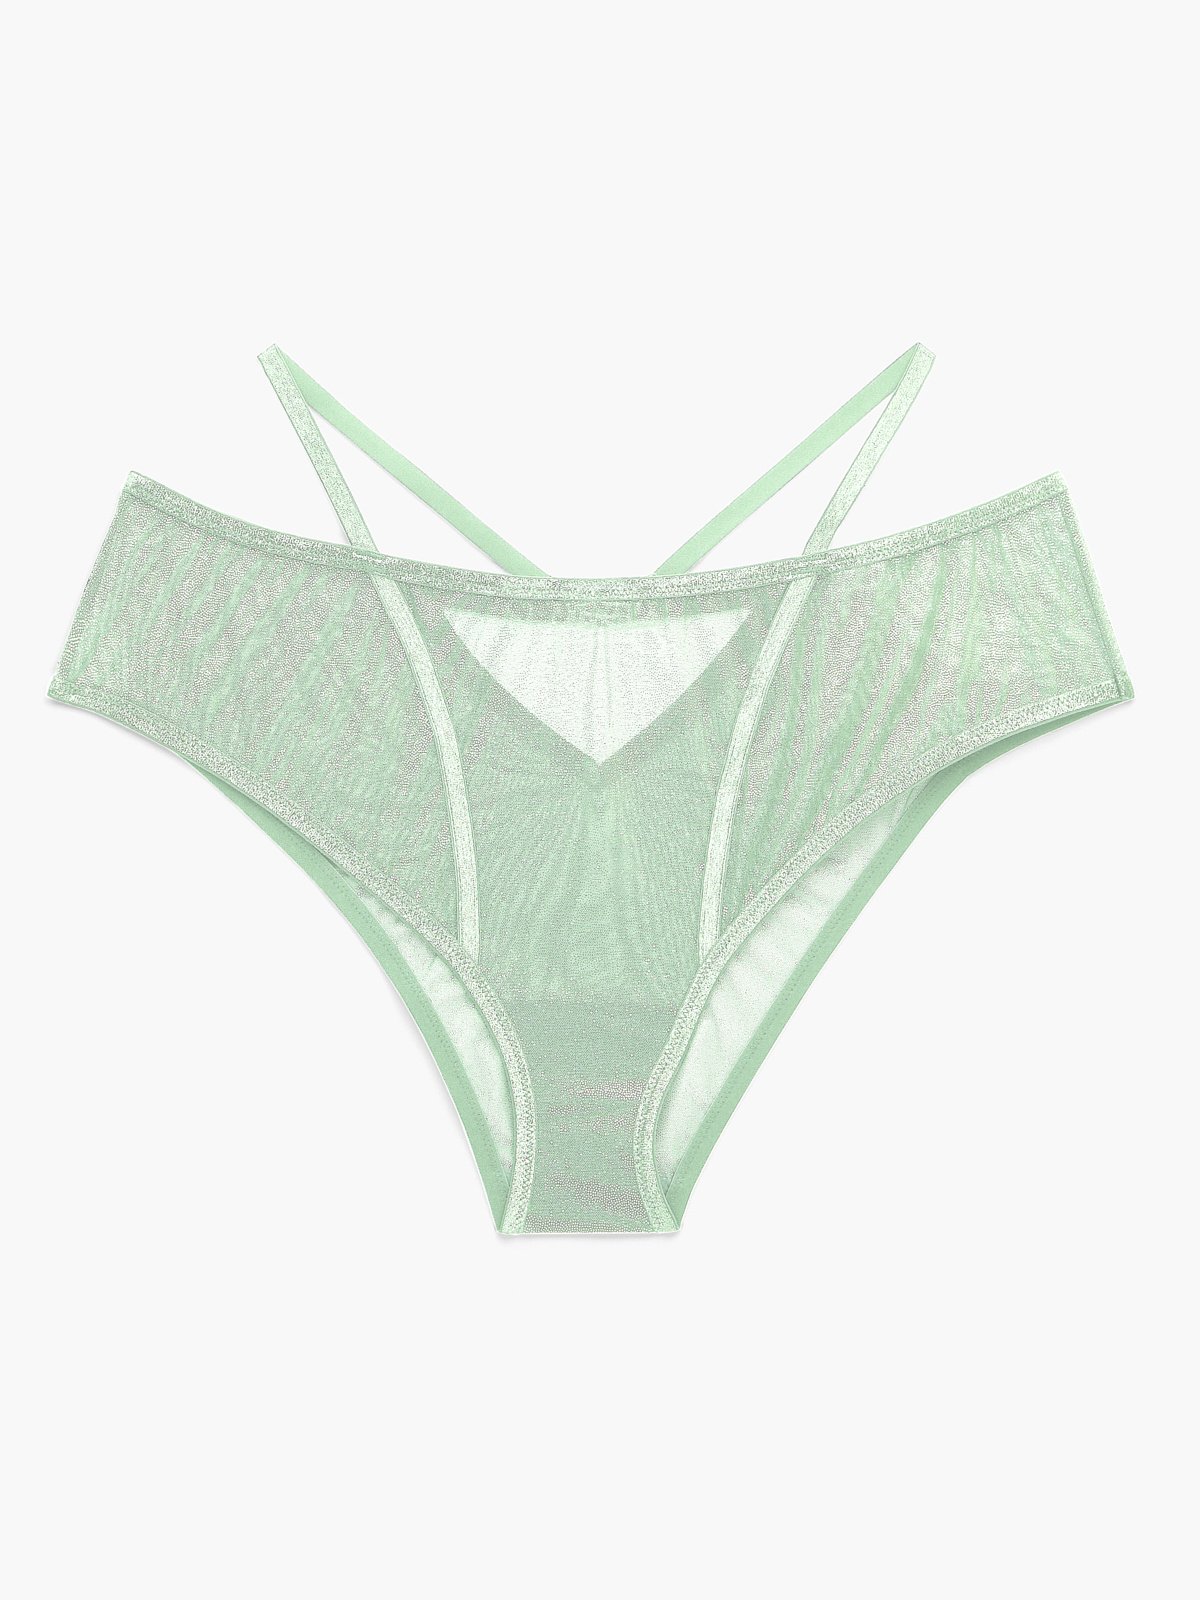 Going Platinum Mesh Cheeky Panty in Green